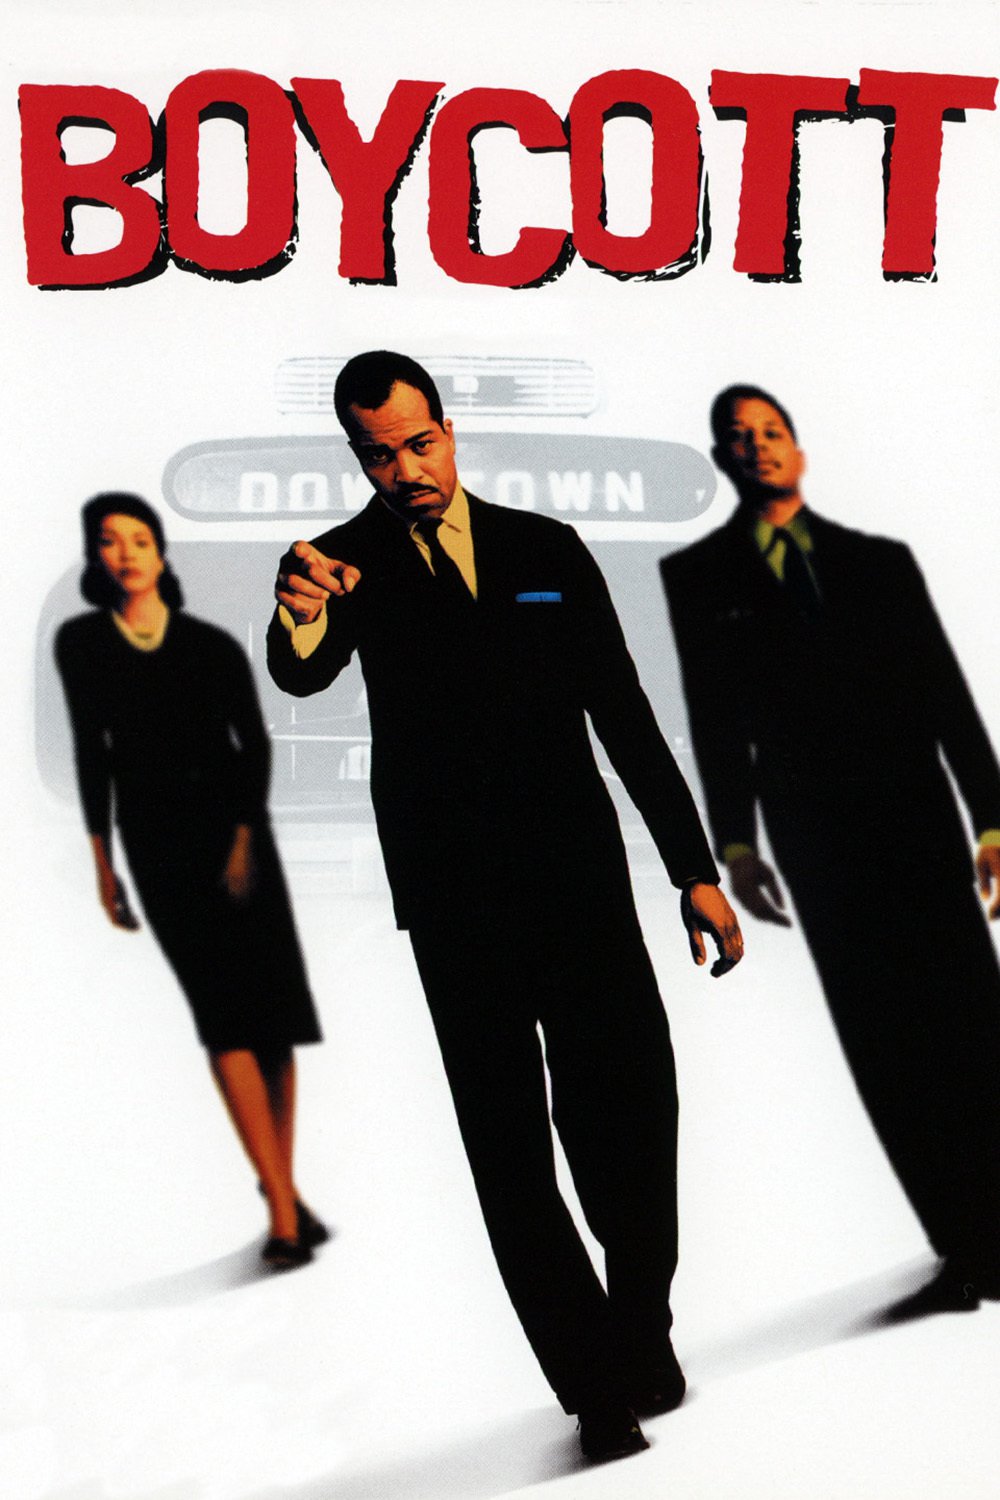 Poster for the movie "Boycott"